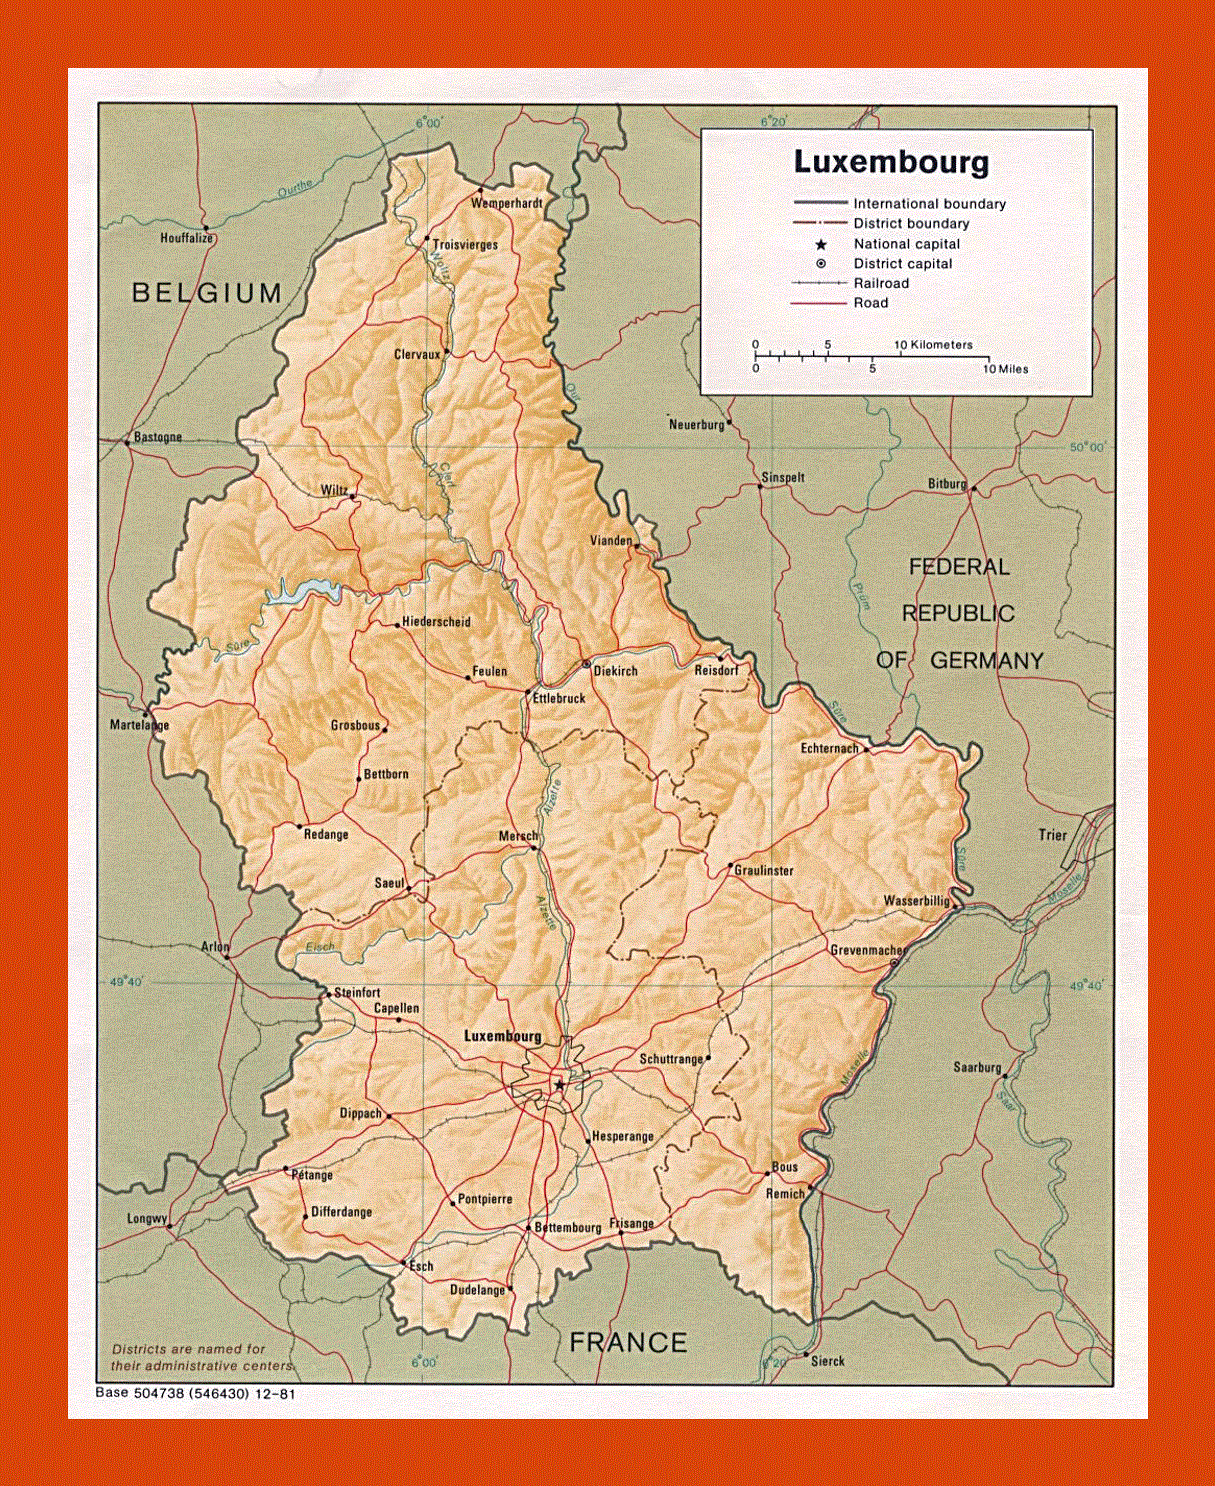 Political and administrative map of Luxembourg - 1981